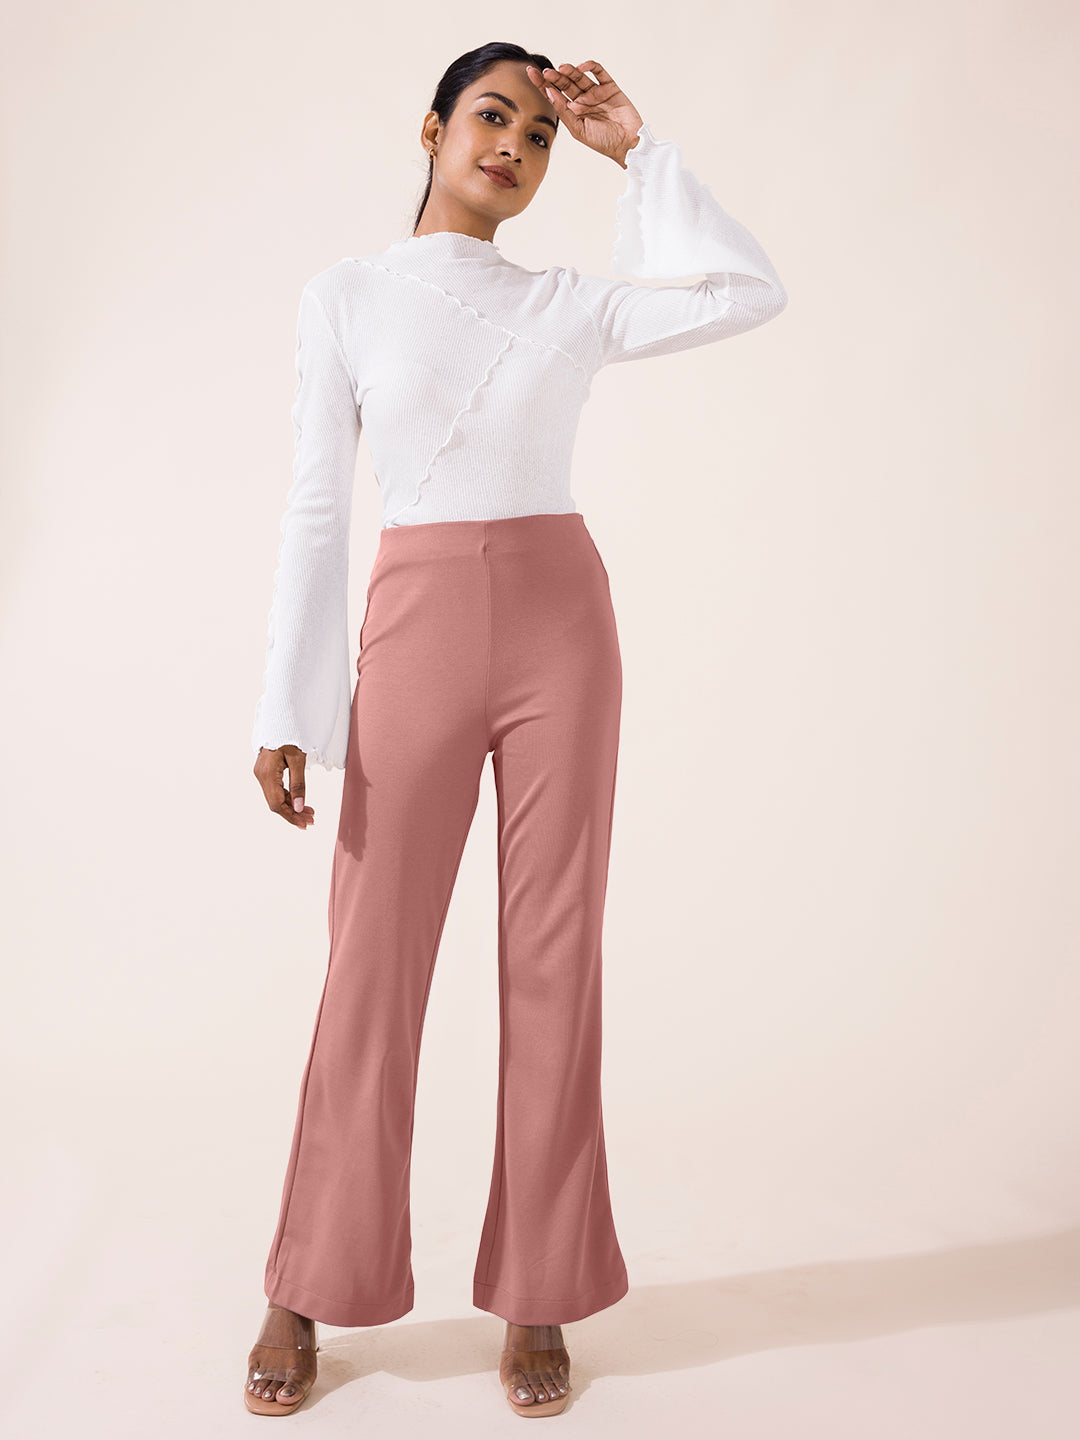 Vibrant Pink High Waist Stretchy Flare Pants Bell Bottoms (S-XL